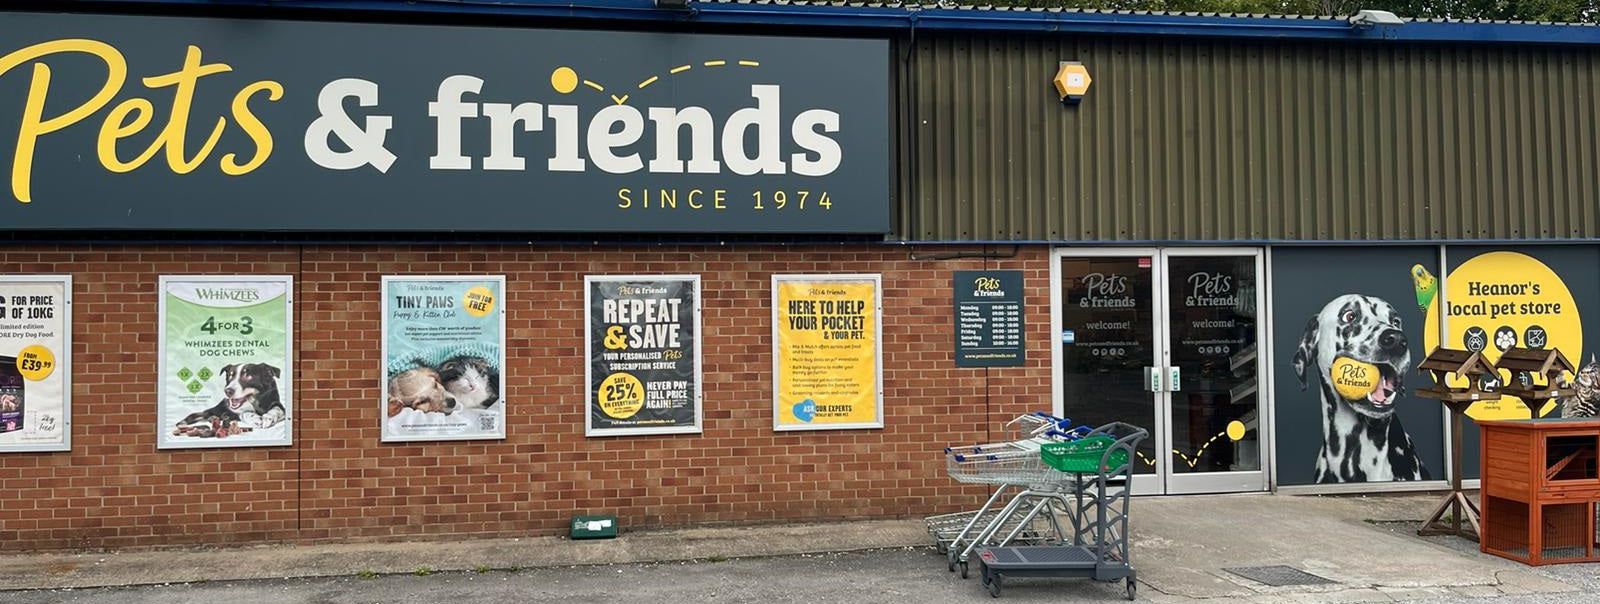 pets and friends heanor